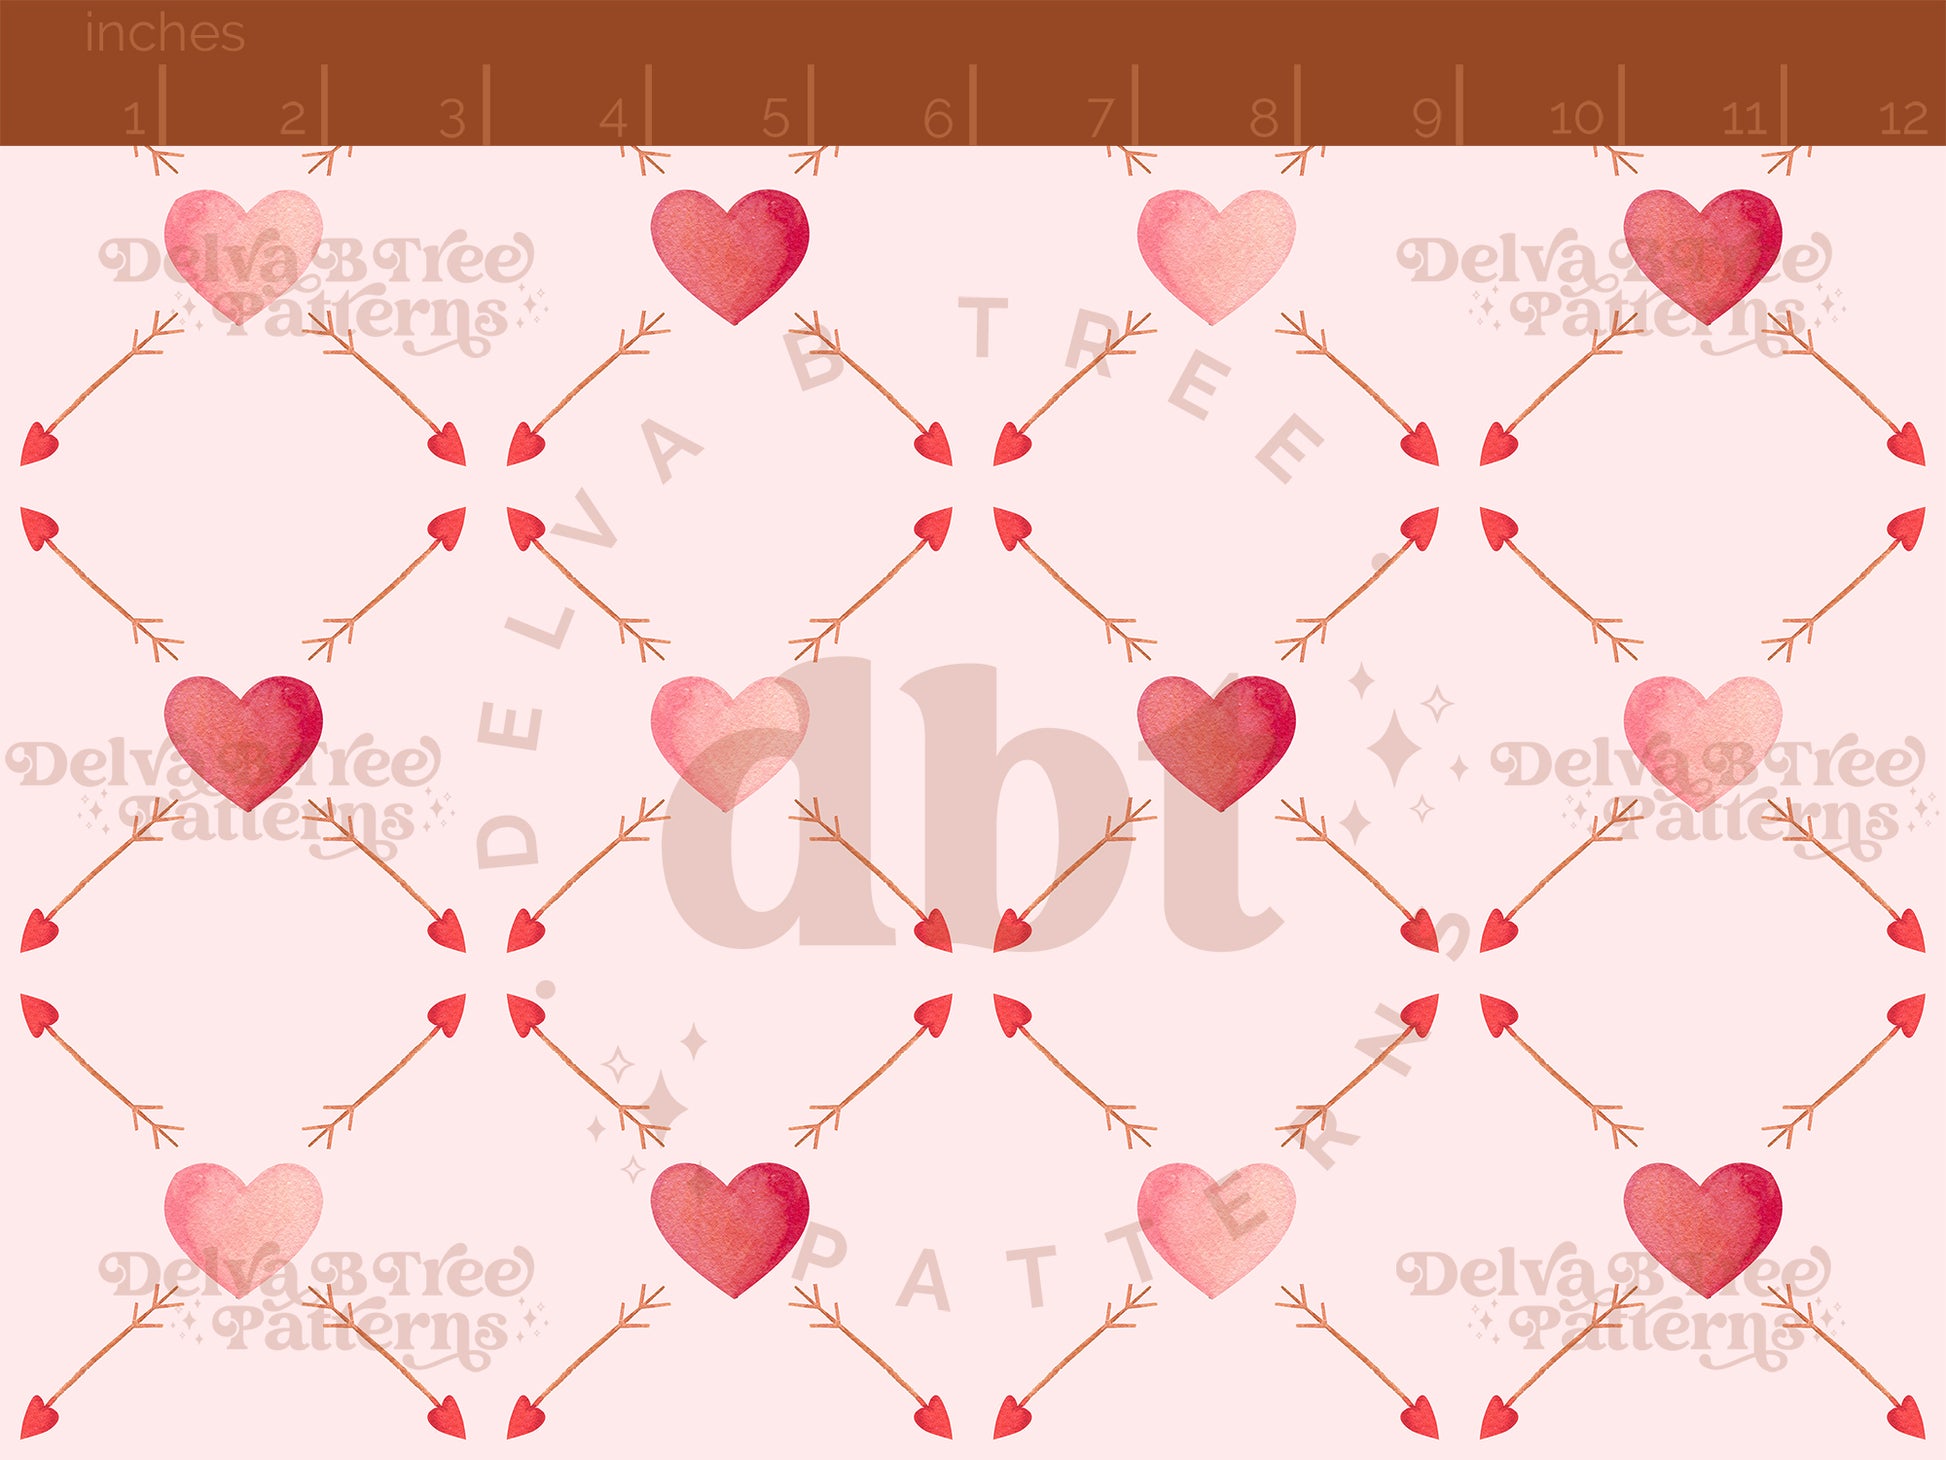 Watercolor pink hearts, red hearts and brown arrows on a pink seamless pattern scale, digital file for small shops that make handmade products in small batches.